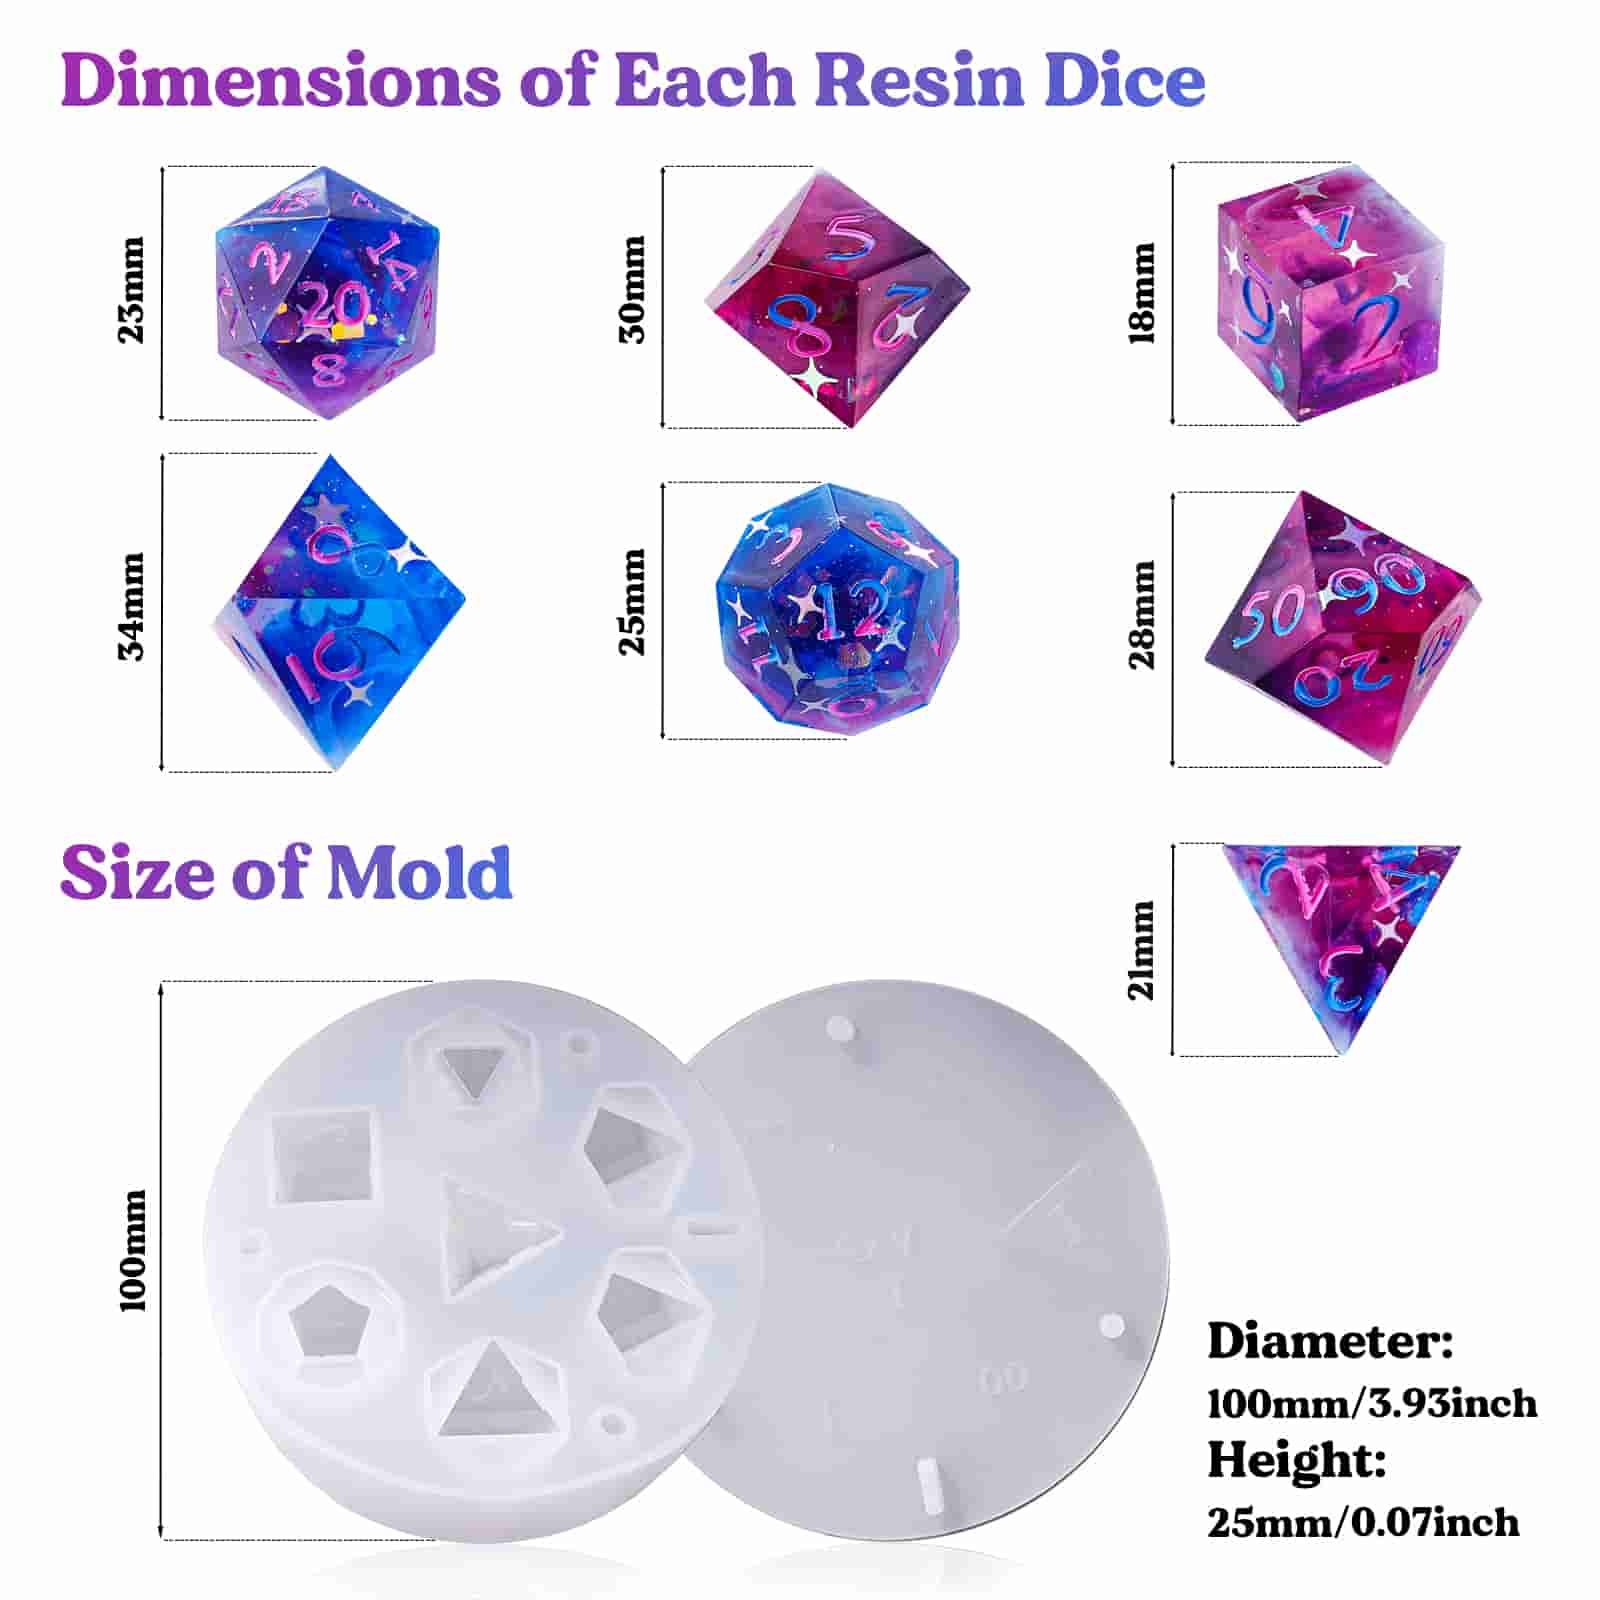 UOUYOO Polyhedral Dice Resin Casting Molds,Silicone Resin Molds,Making Resin Molds for DIY Crafts(1 Pack)